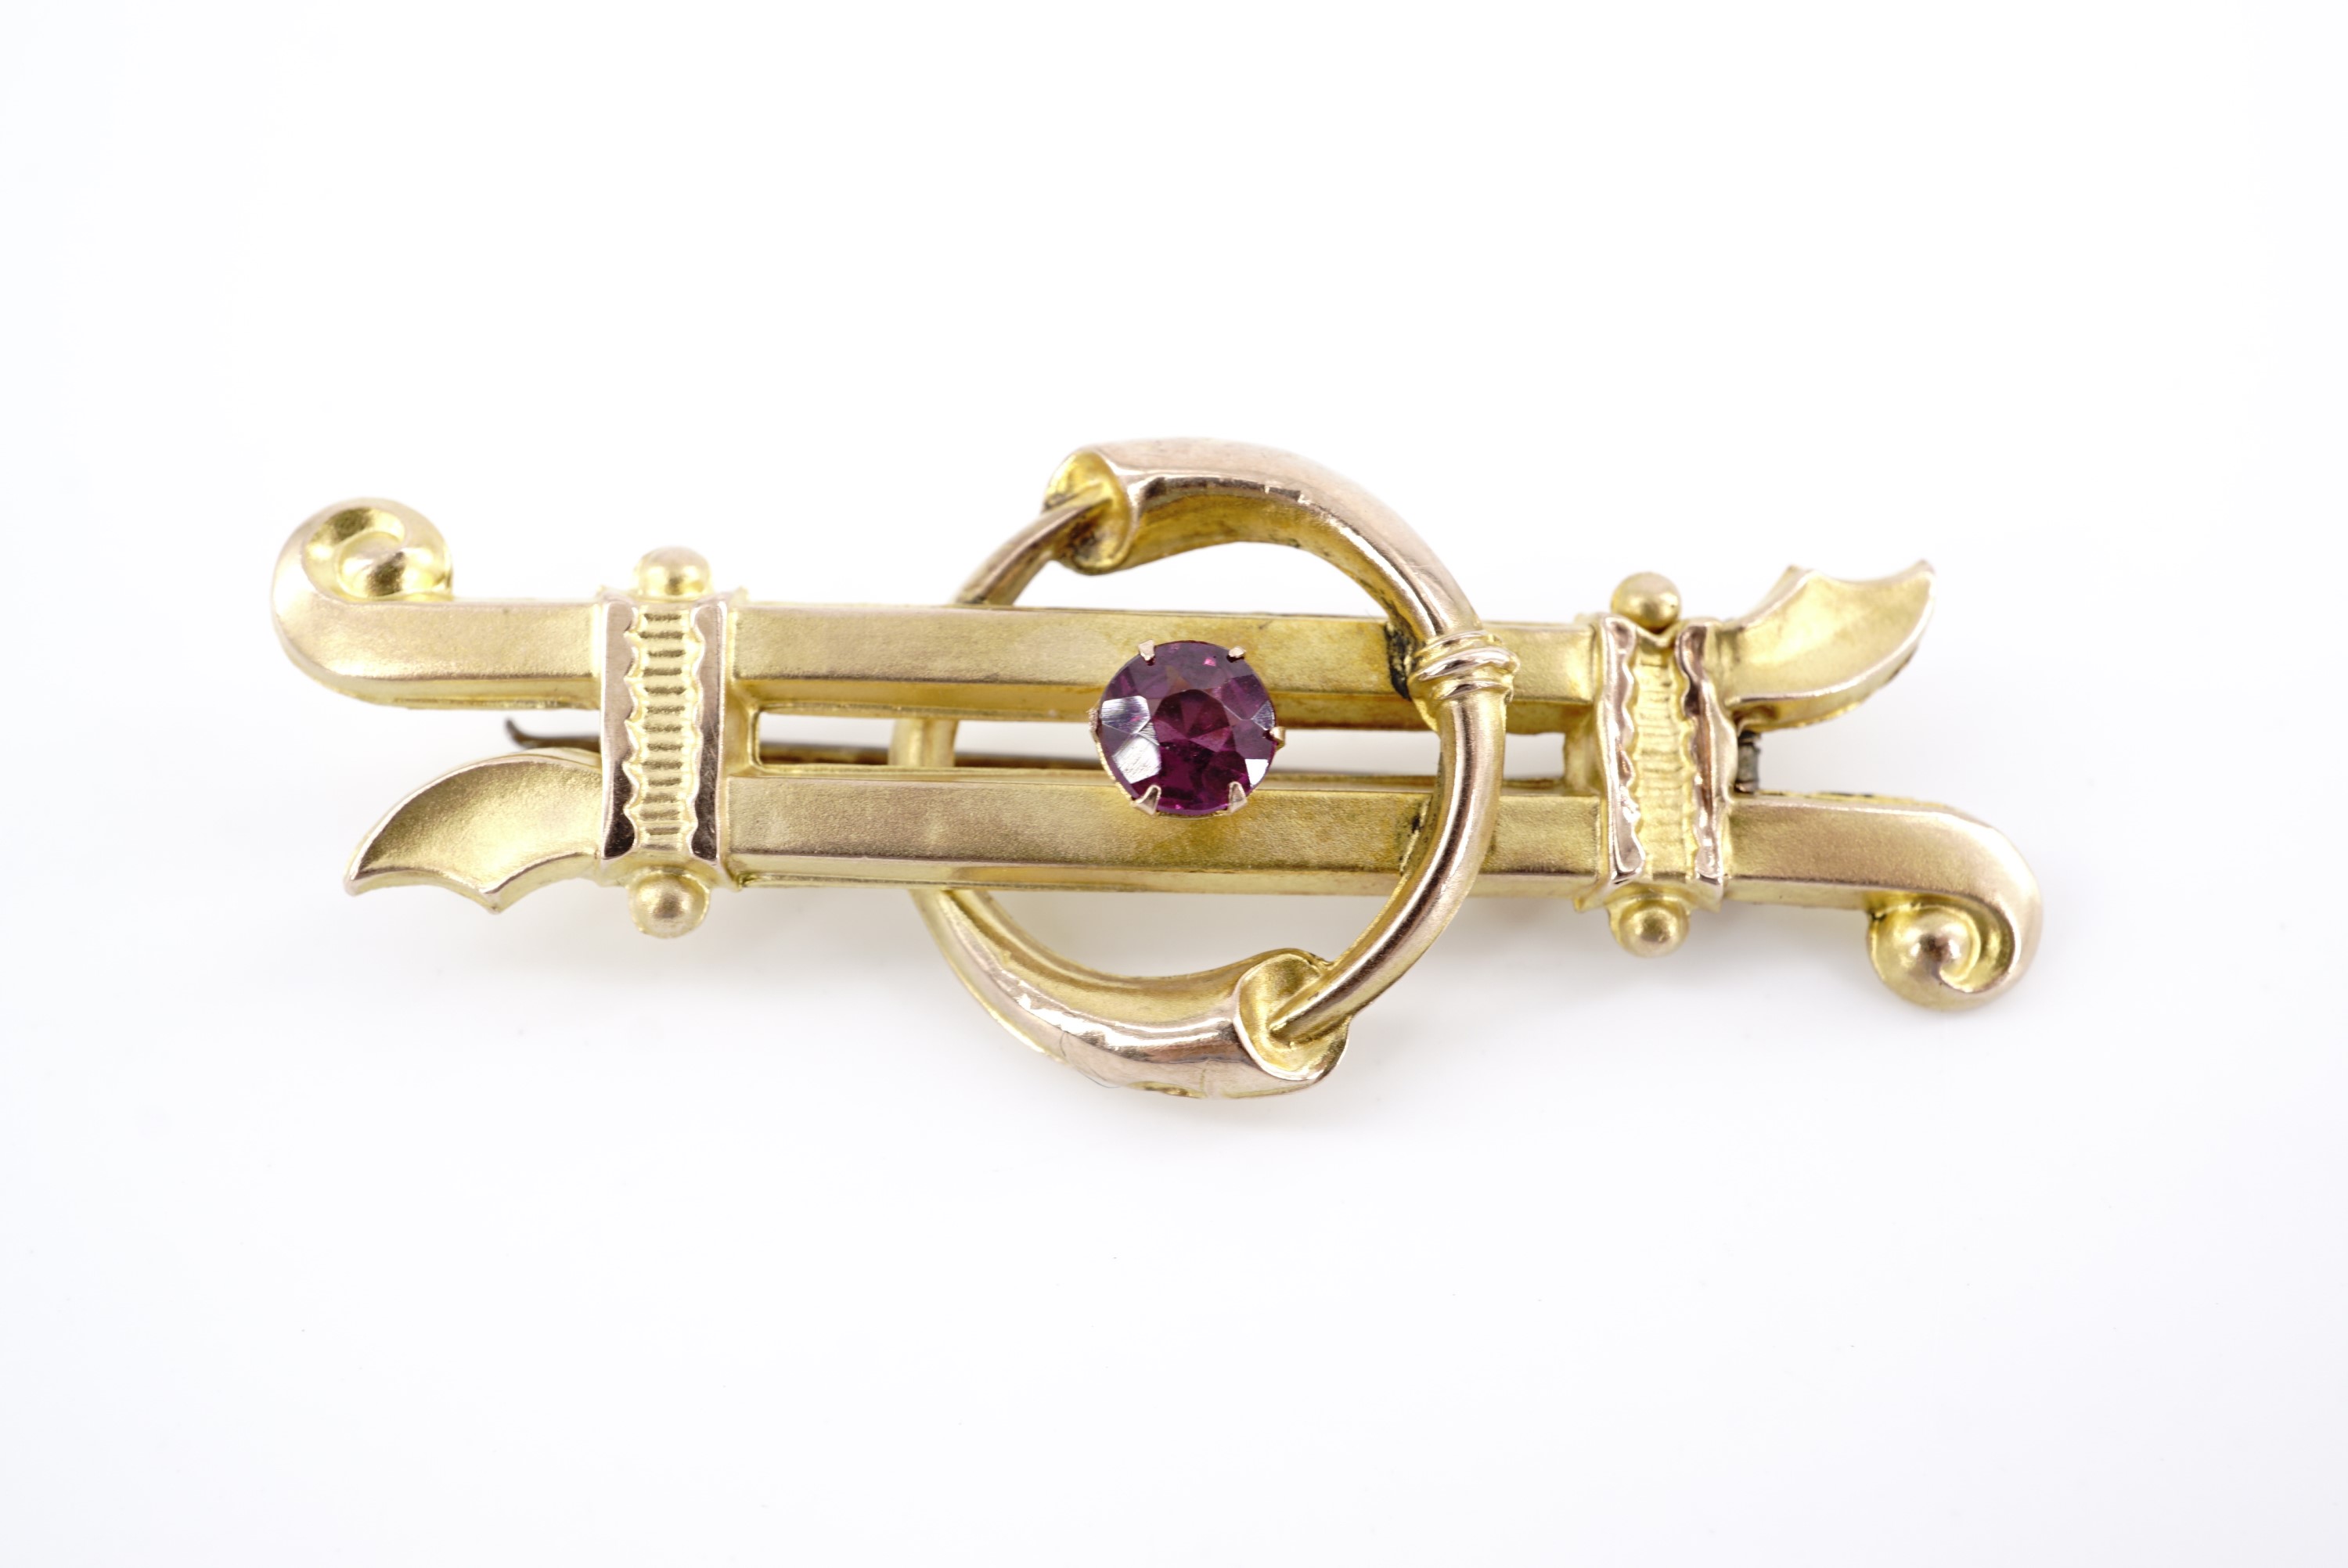 A Victorian almandine and 9 ct yellow metal bar brooch, the stone set within an annulus of inter-